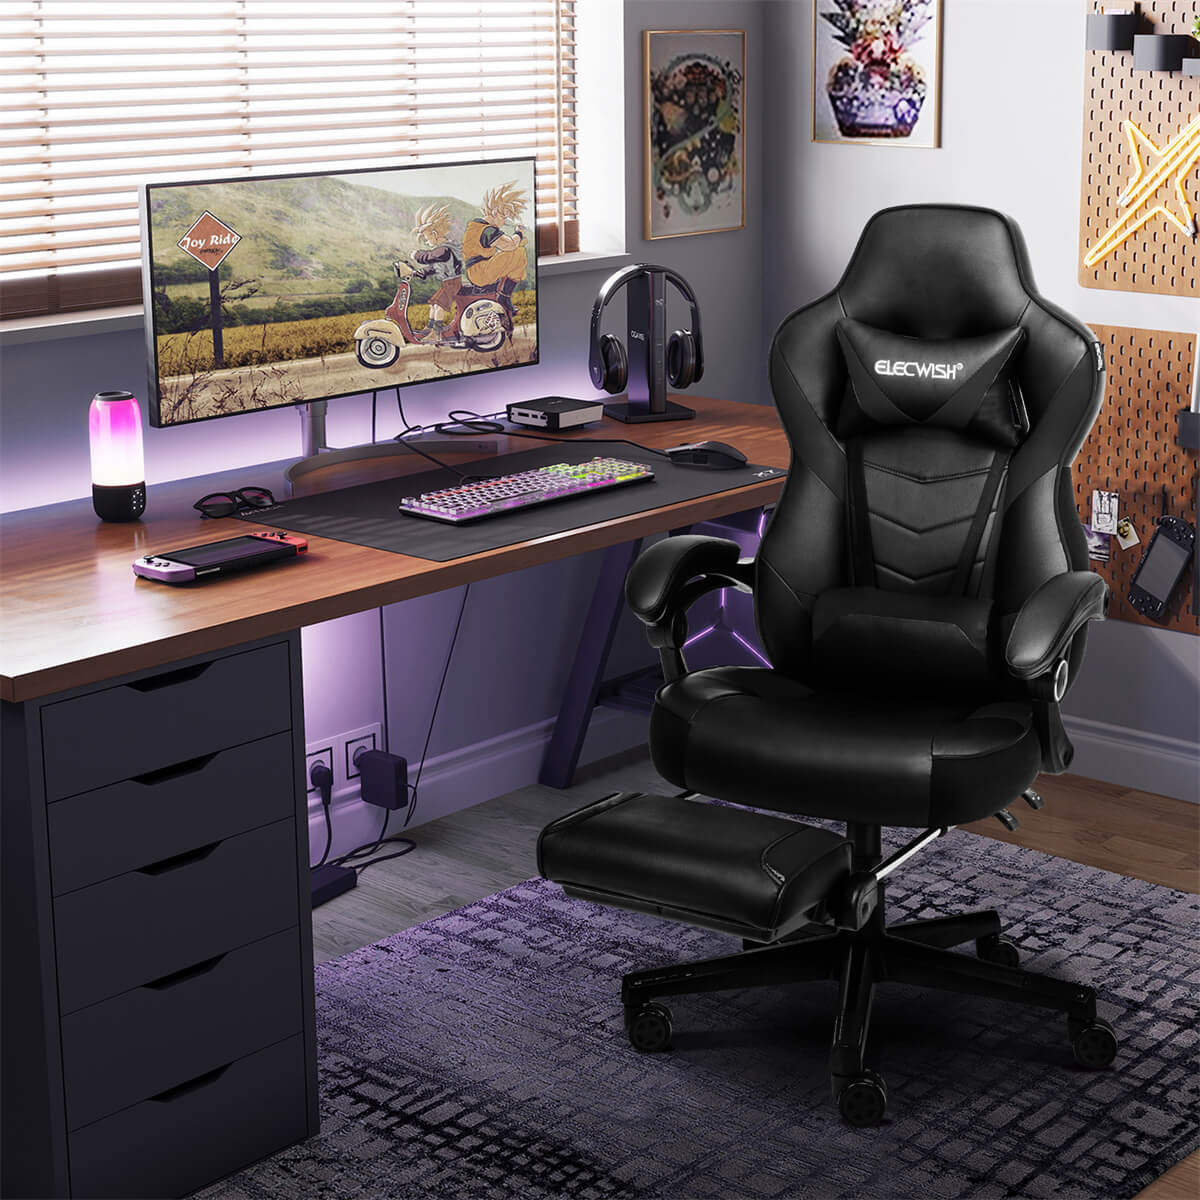 Elecwish Video Game Chairs Gray Gaming Chair With Footrest OC087 displays in the room